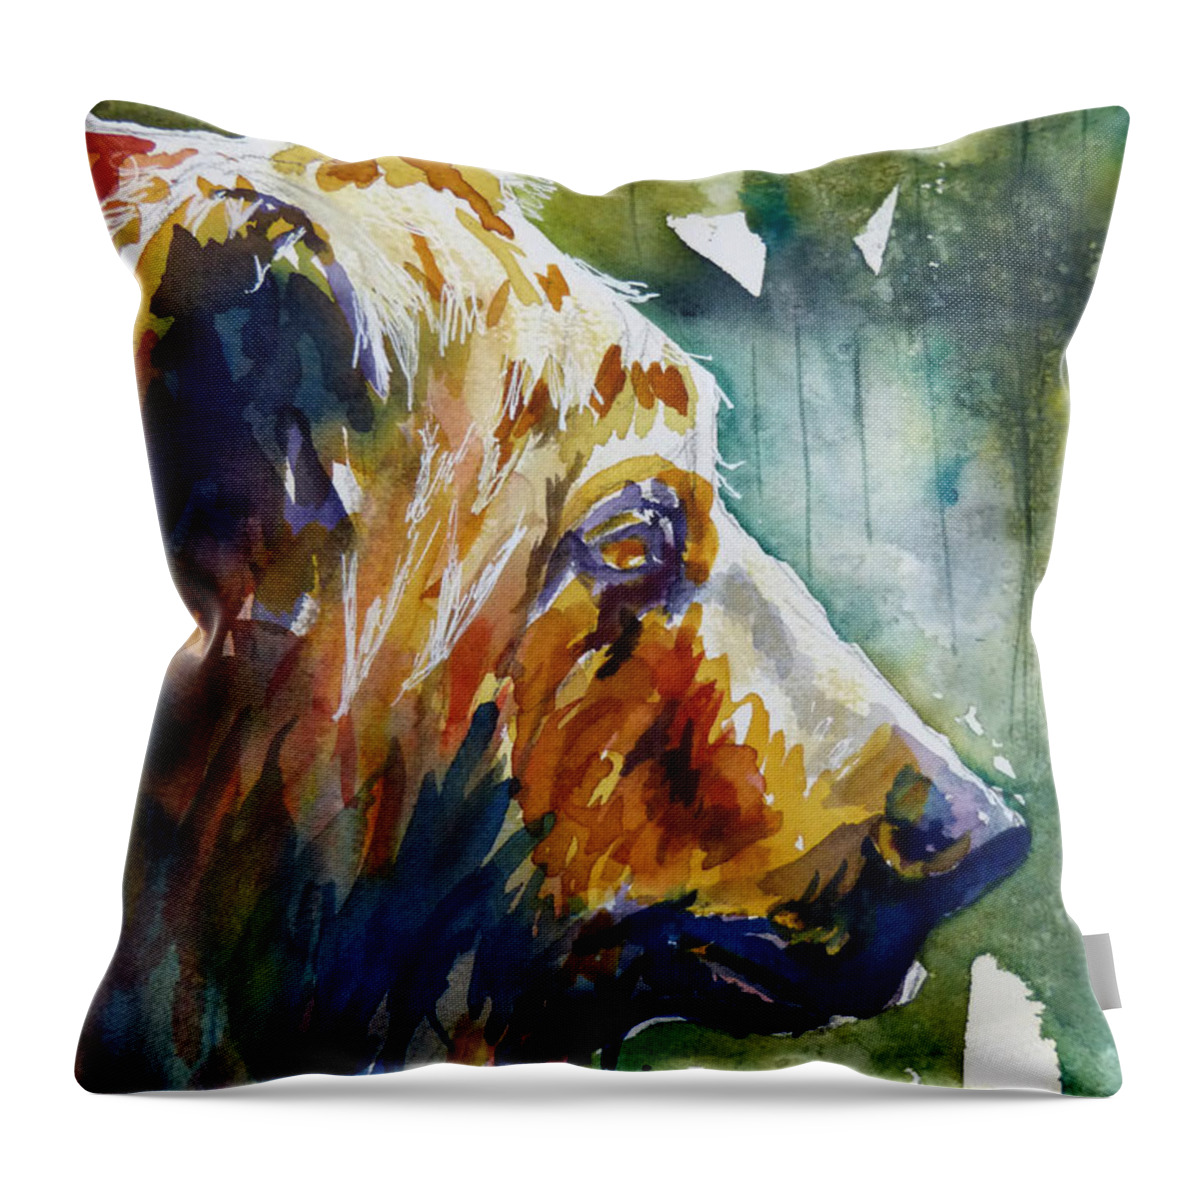 Old Bear Throw Pillow featuring the painting The Old One by P Maure Bausch